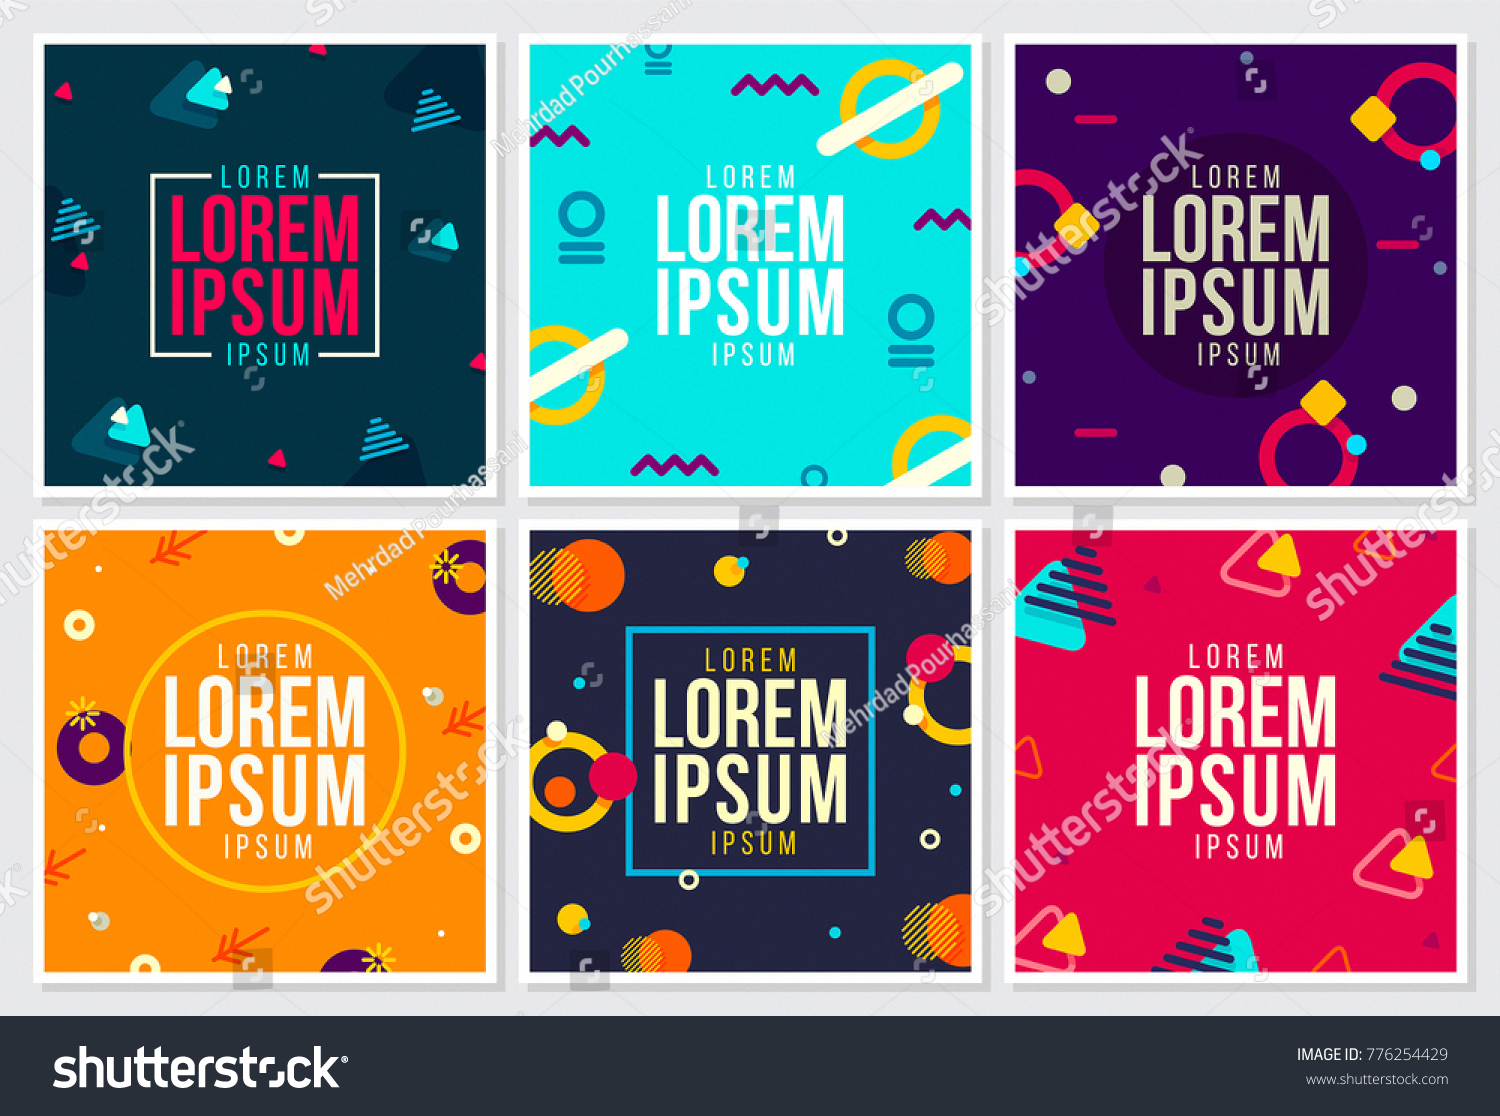 stock-vector-memphis-style-covers-design-with-cute-vector-flat-d-elements-on-dark-and-light-background-776254429